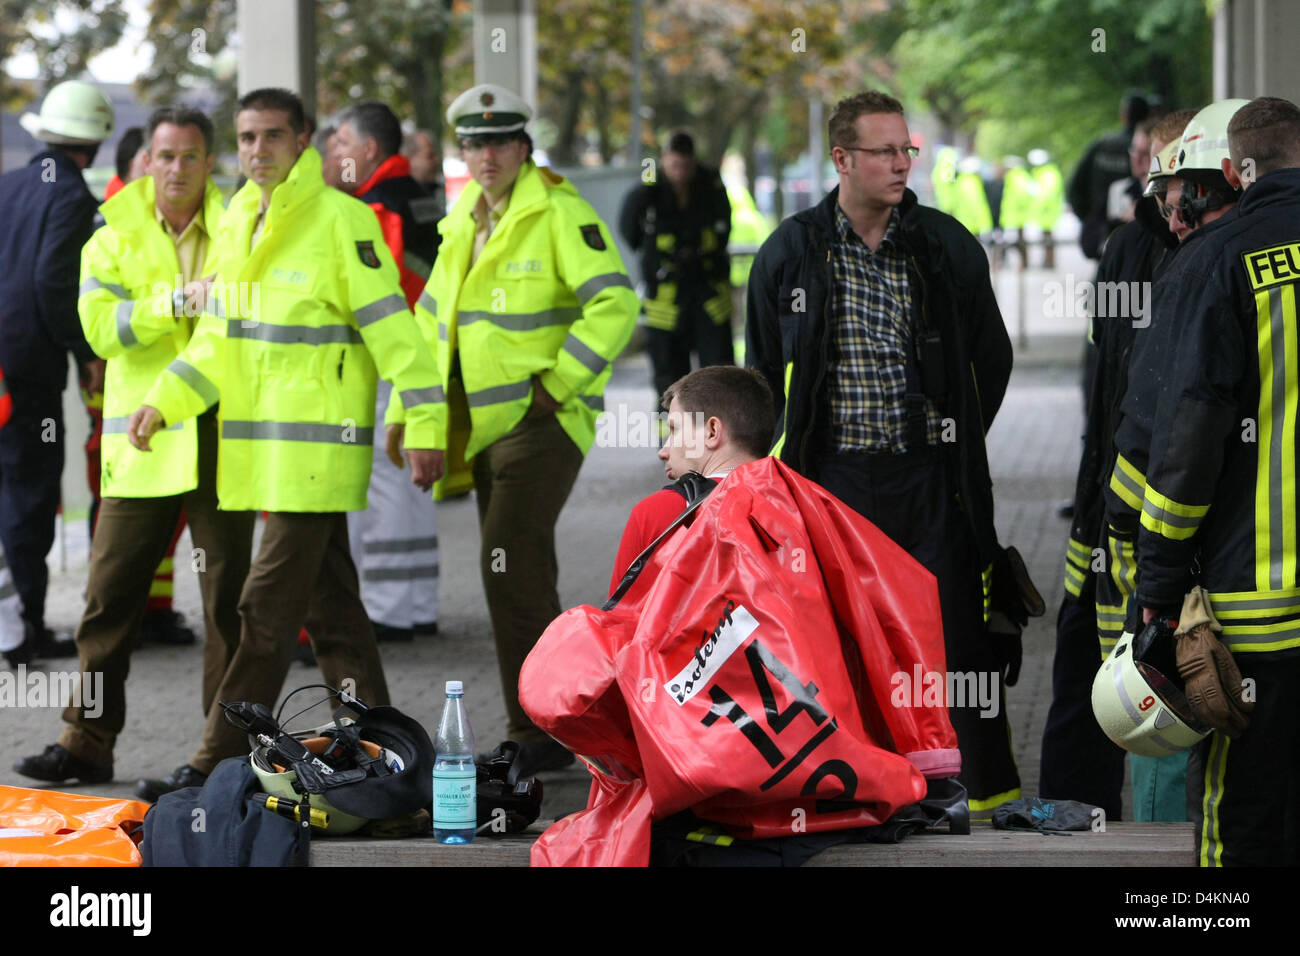 Policemen and ambulance services pictured outside the Albert-Einstein-Gymnasium in Sankt Augustin, Germany, 11 May 2009. A person armed with knives has allegedly entered the school. Photo: THOMAS FREY Stock Photo